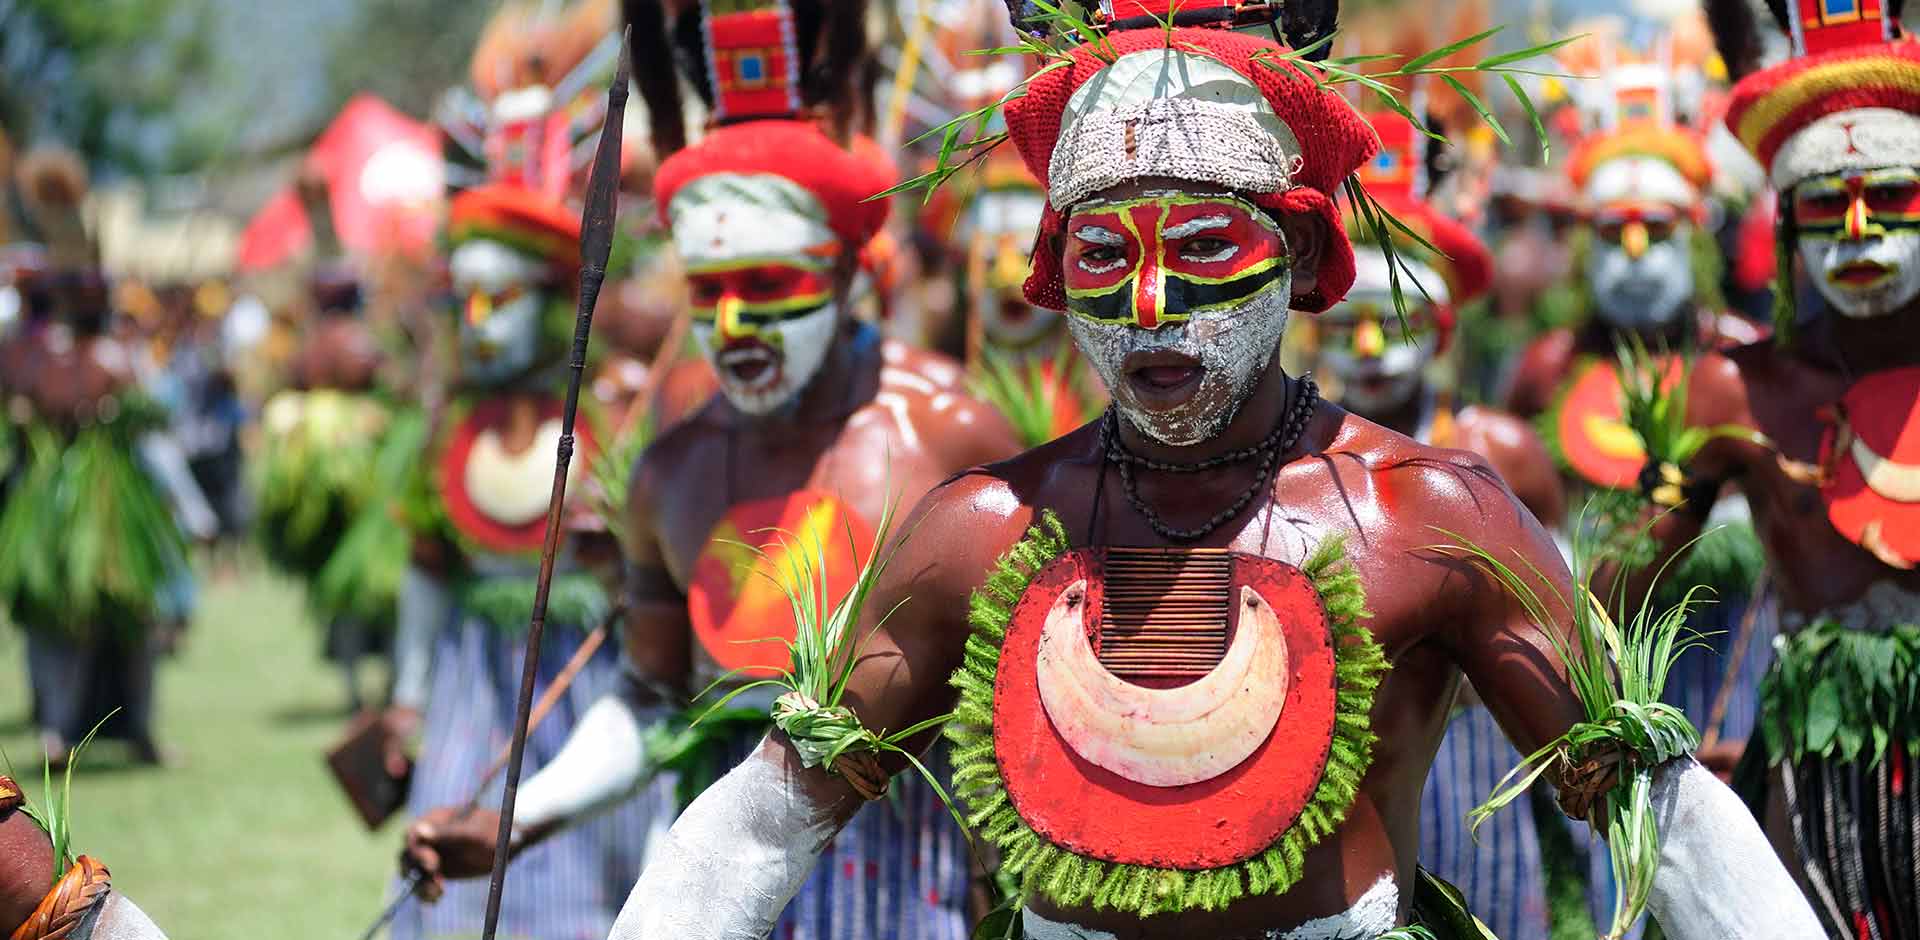 tribes-of-papua-indonesia-an-unlikely-guest-at-a-highlands-festival